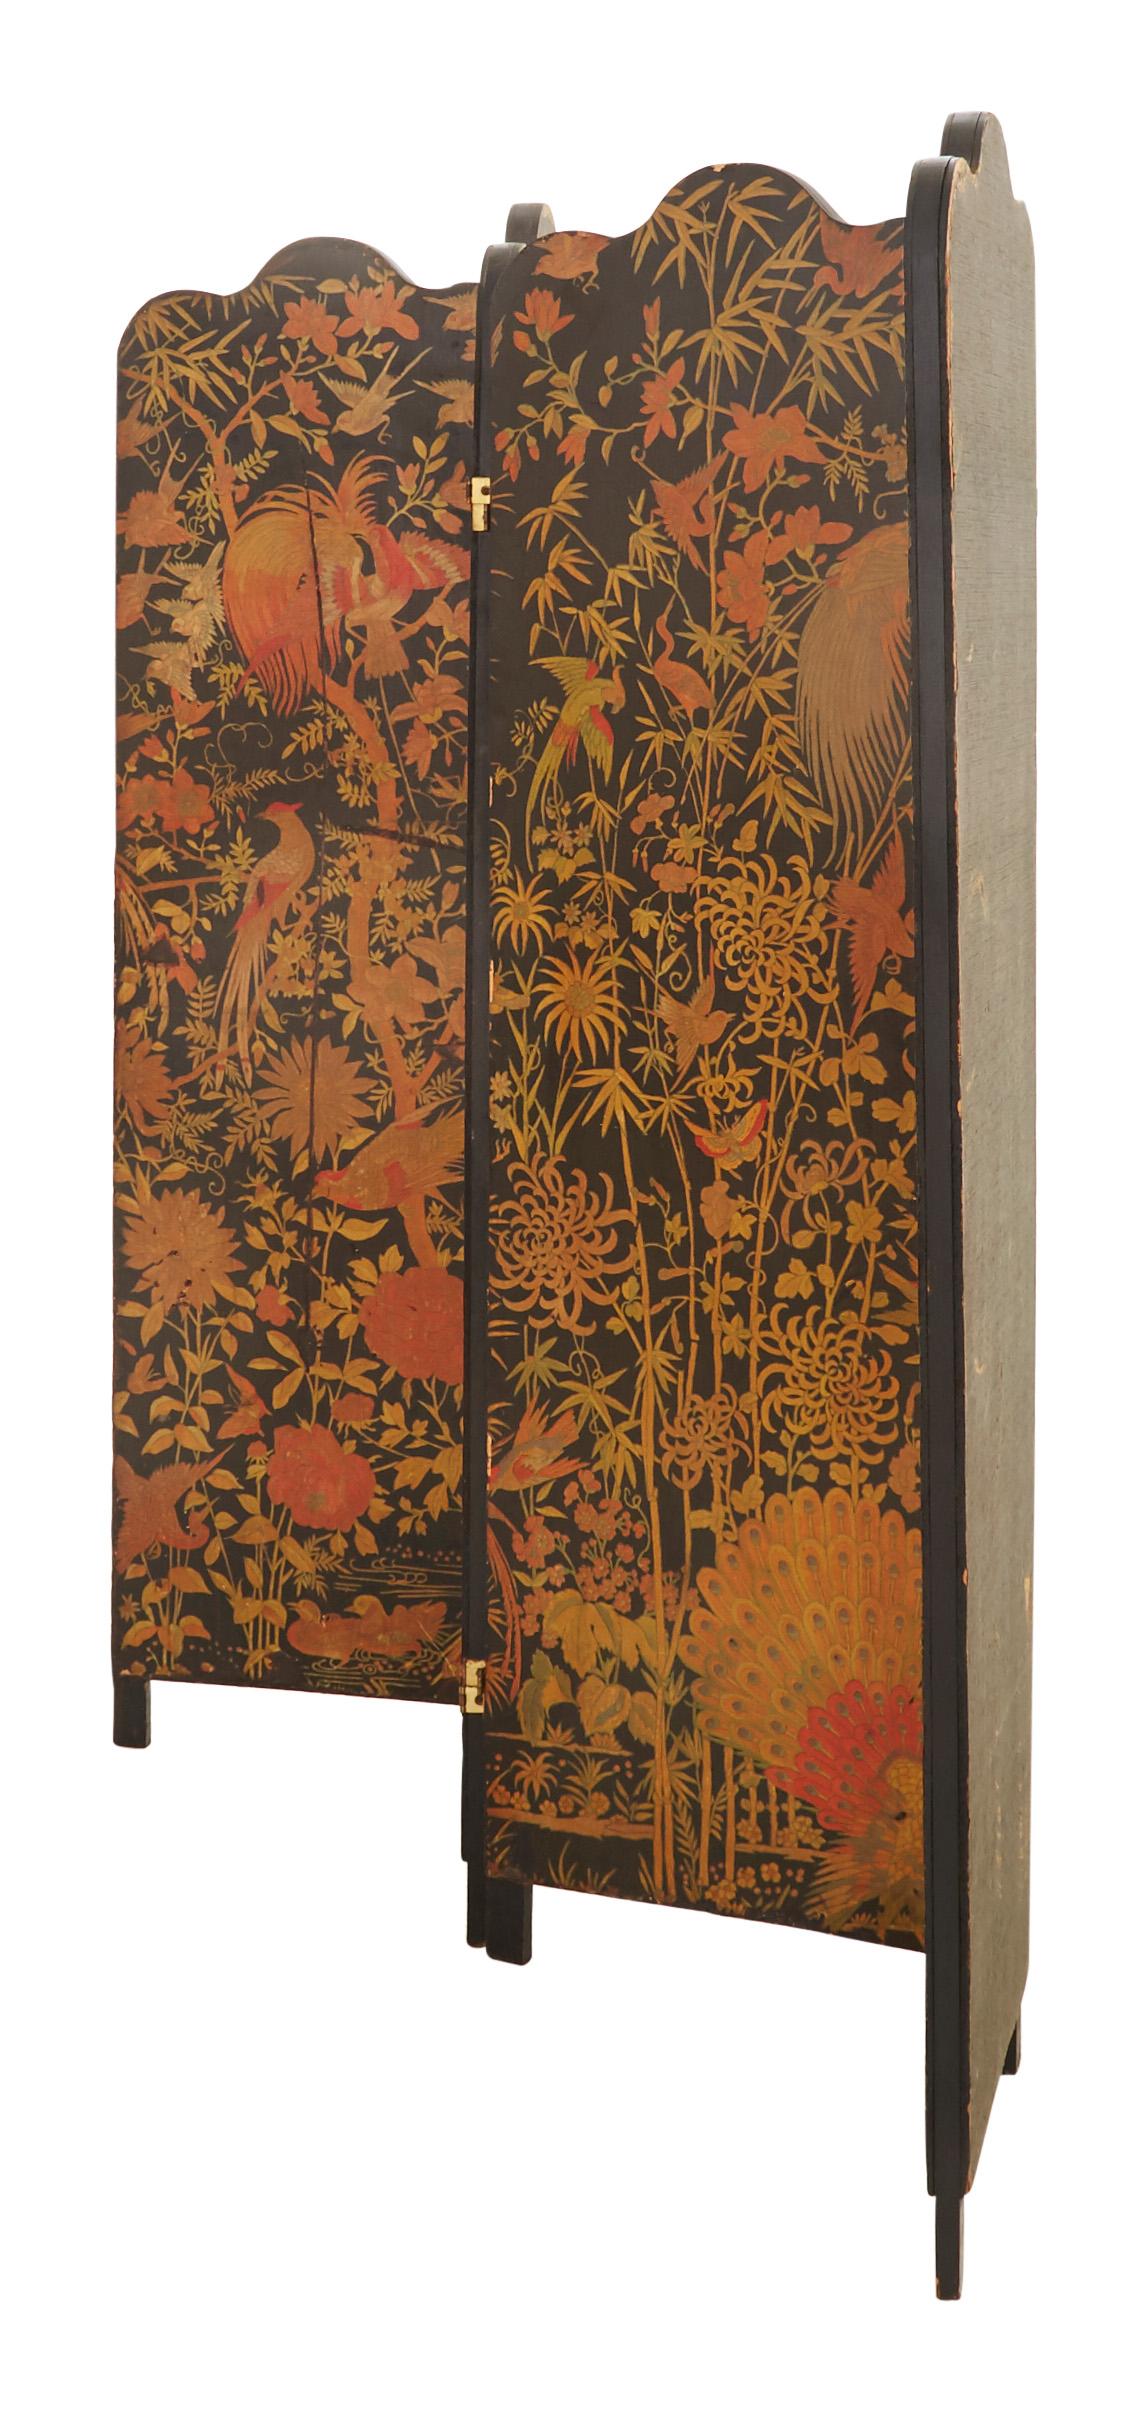 •Asian inspired
•4-panel, papered screen with flora and fauna print
•Early 20th century
•American

Dimensions:
•Overall: 79” W x 1.5” D x 66.25” H
•Each panel: 19.75” W x 66.25” H.